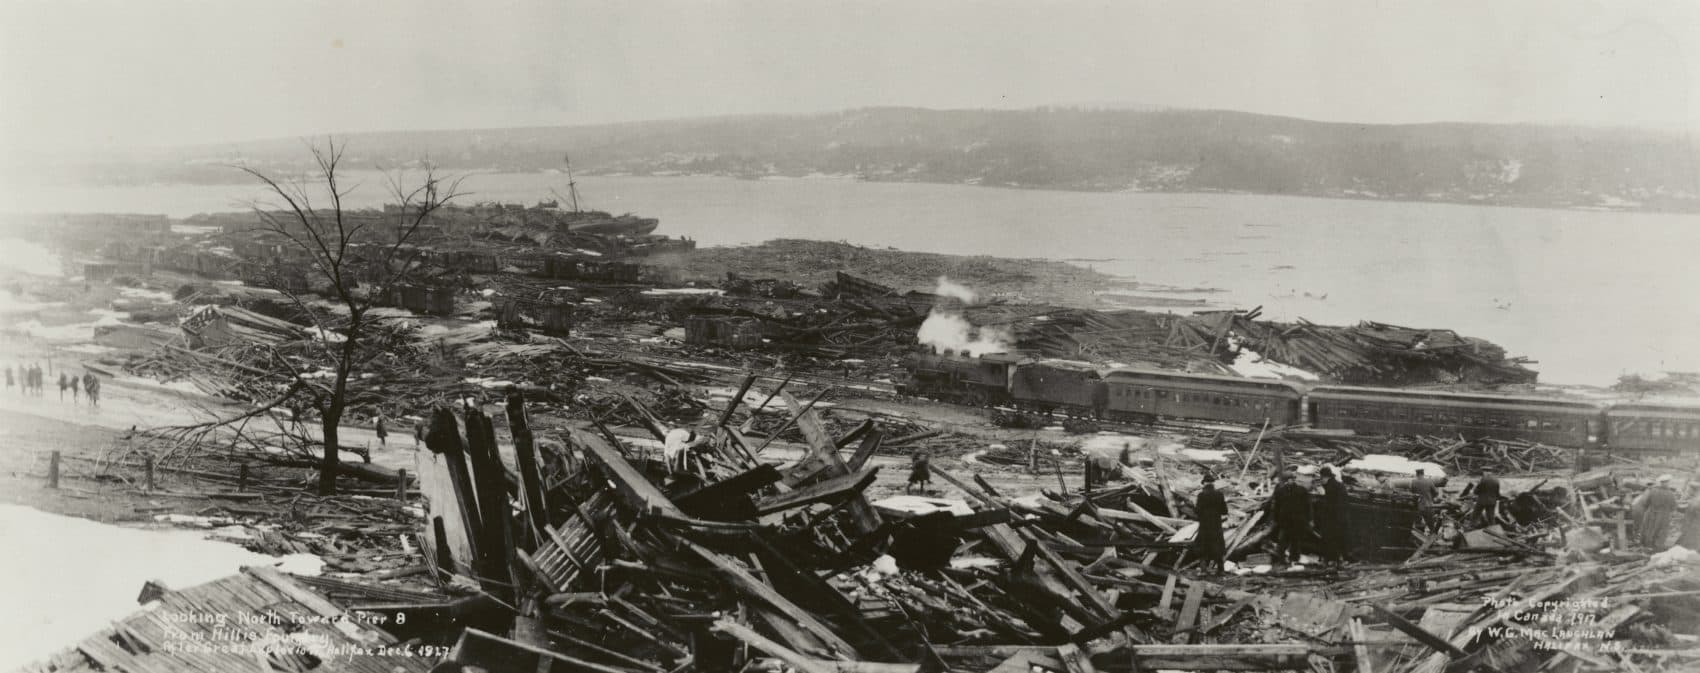 Some of the devastation in Halifax, Nova Scotia after the December 6, 1917 explosion. (Courtesy HarperCollins/Nova Scotia Archives)